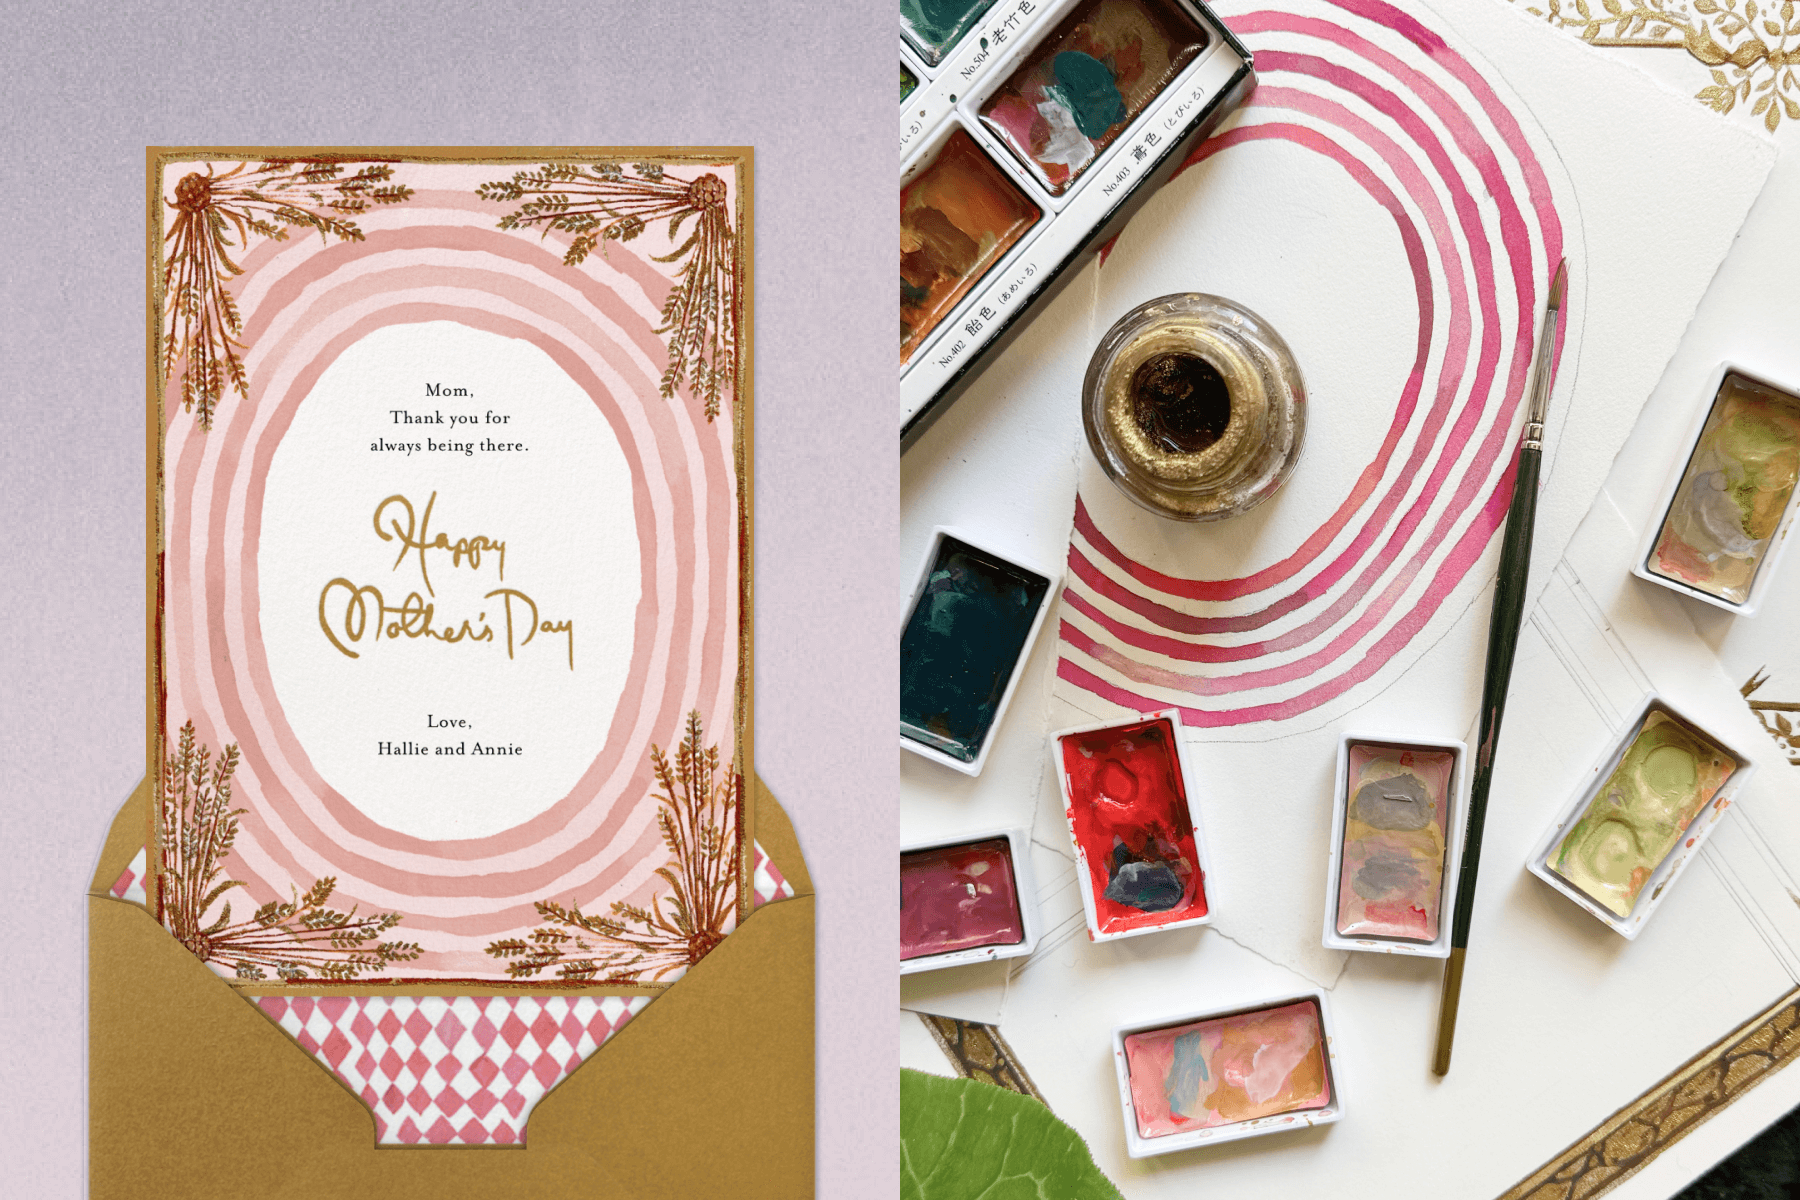 A Mother’s Day card with a pink watercolor oval border and gold trim with wheat in corners emerging from a gold envelope; a workspace of watercolor paint shows the creation of the card to the left. 